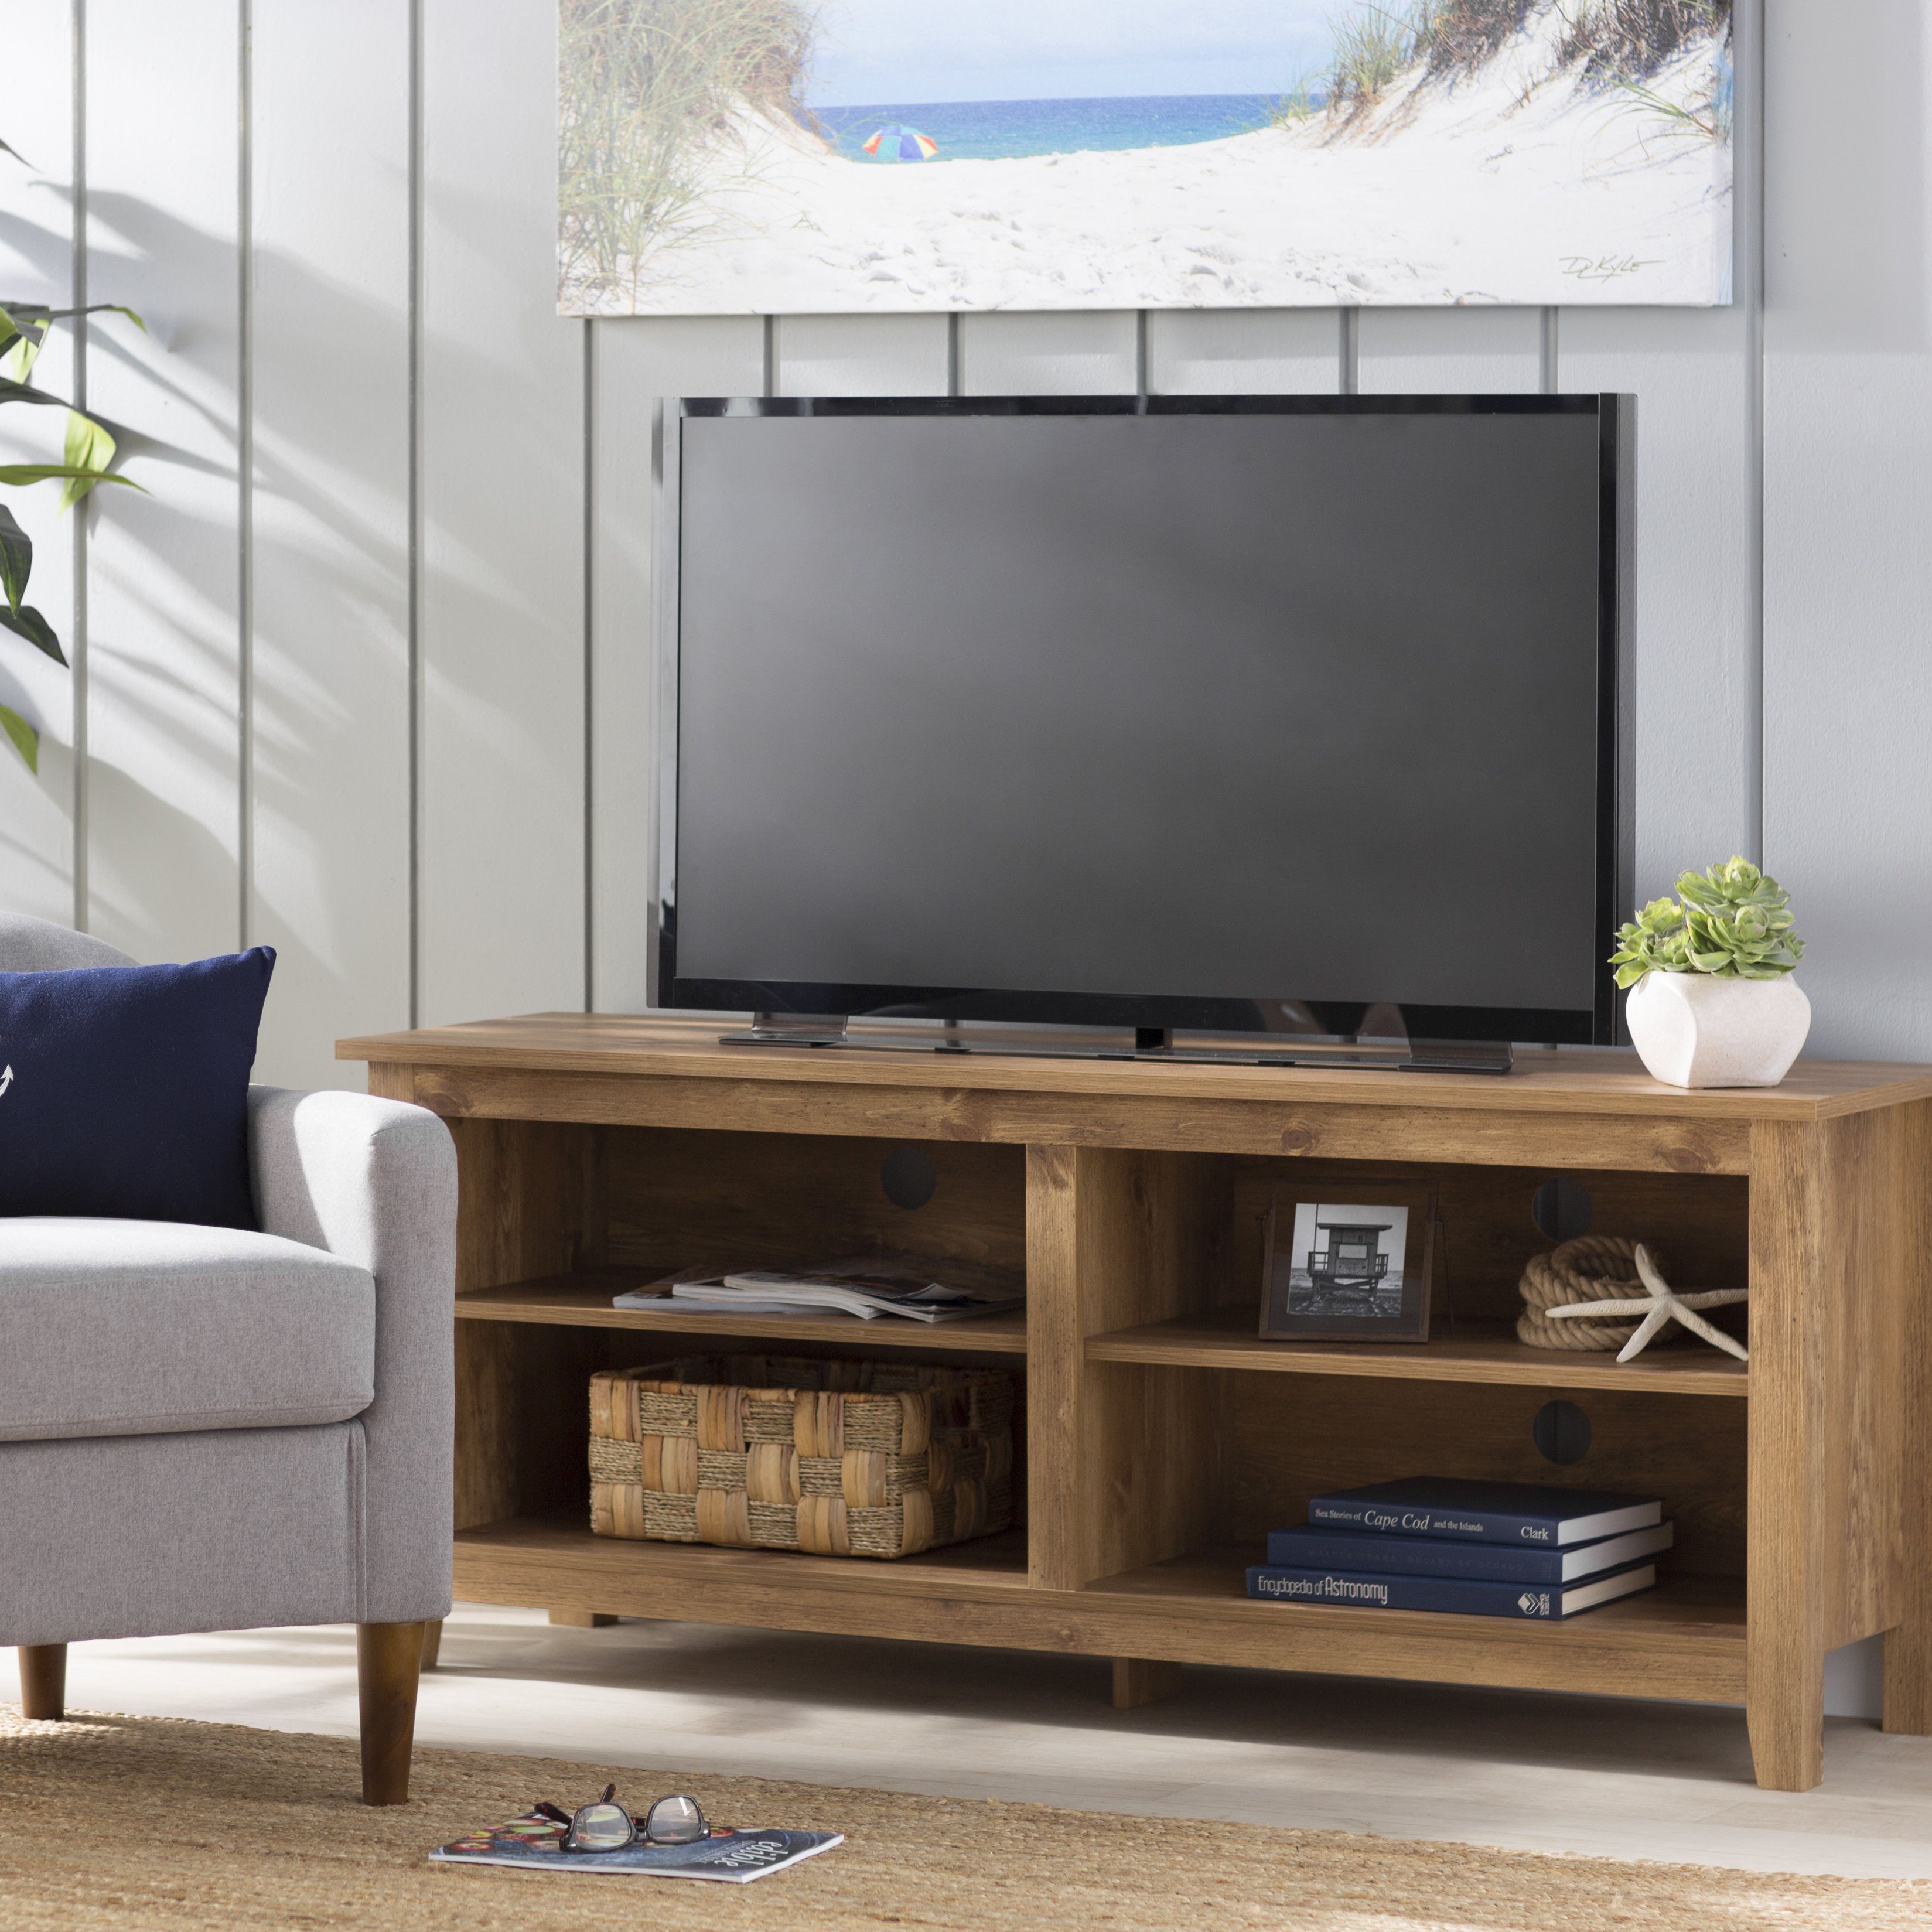 Tv Stands & Entertainment Centers You'll Love | Wayfair Intended For Sinclair Grey 64 Inch Tv Stands (View 28 of 30)